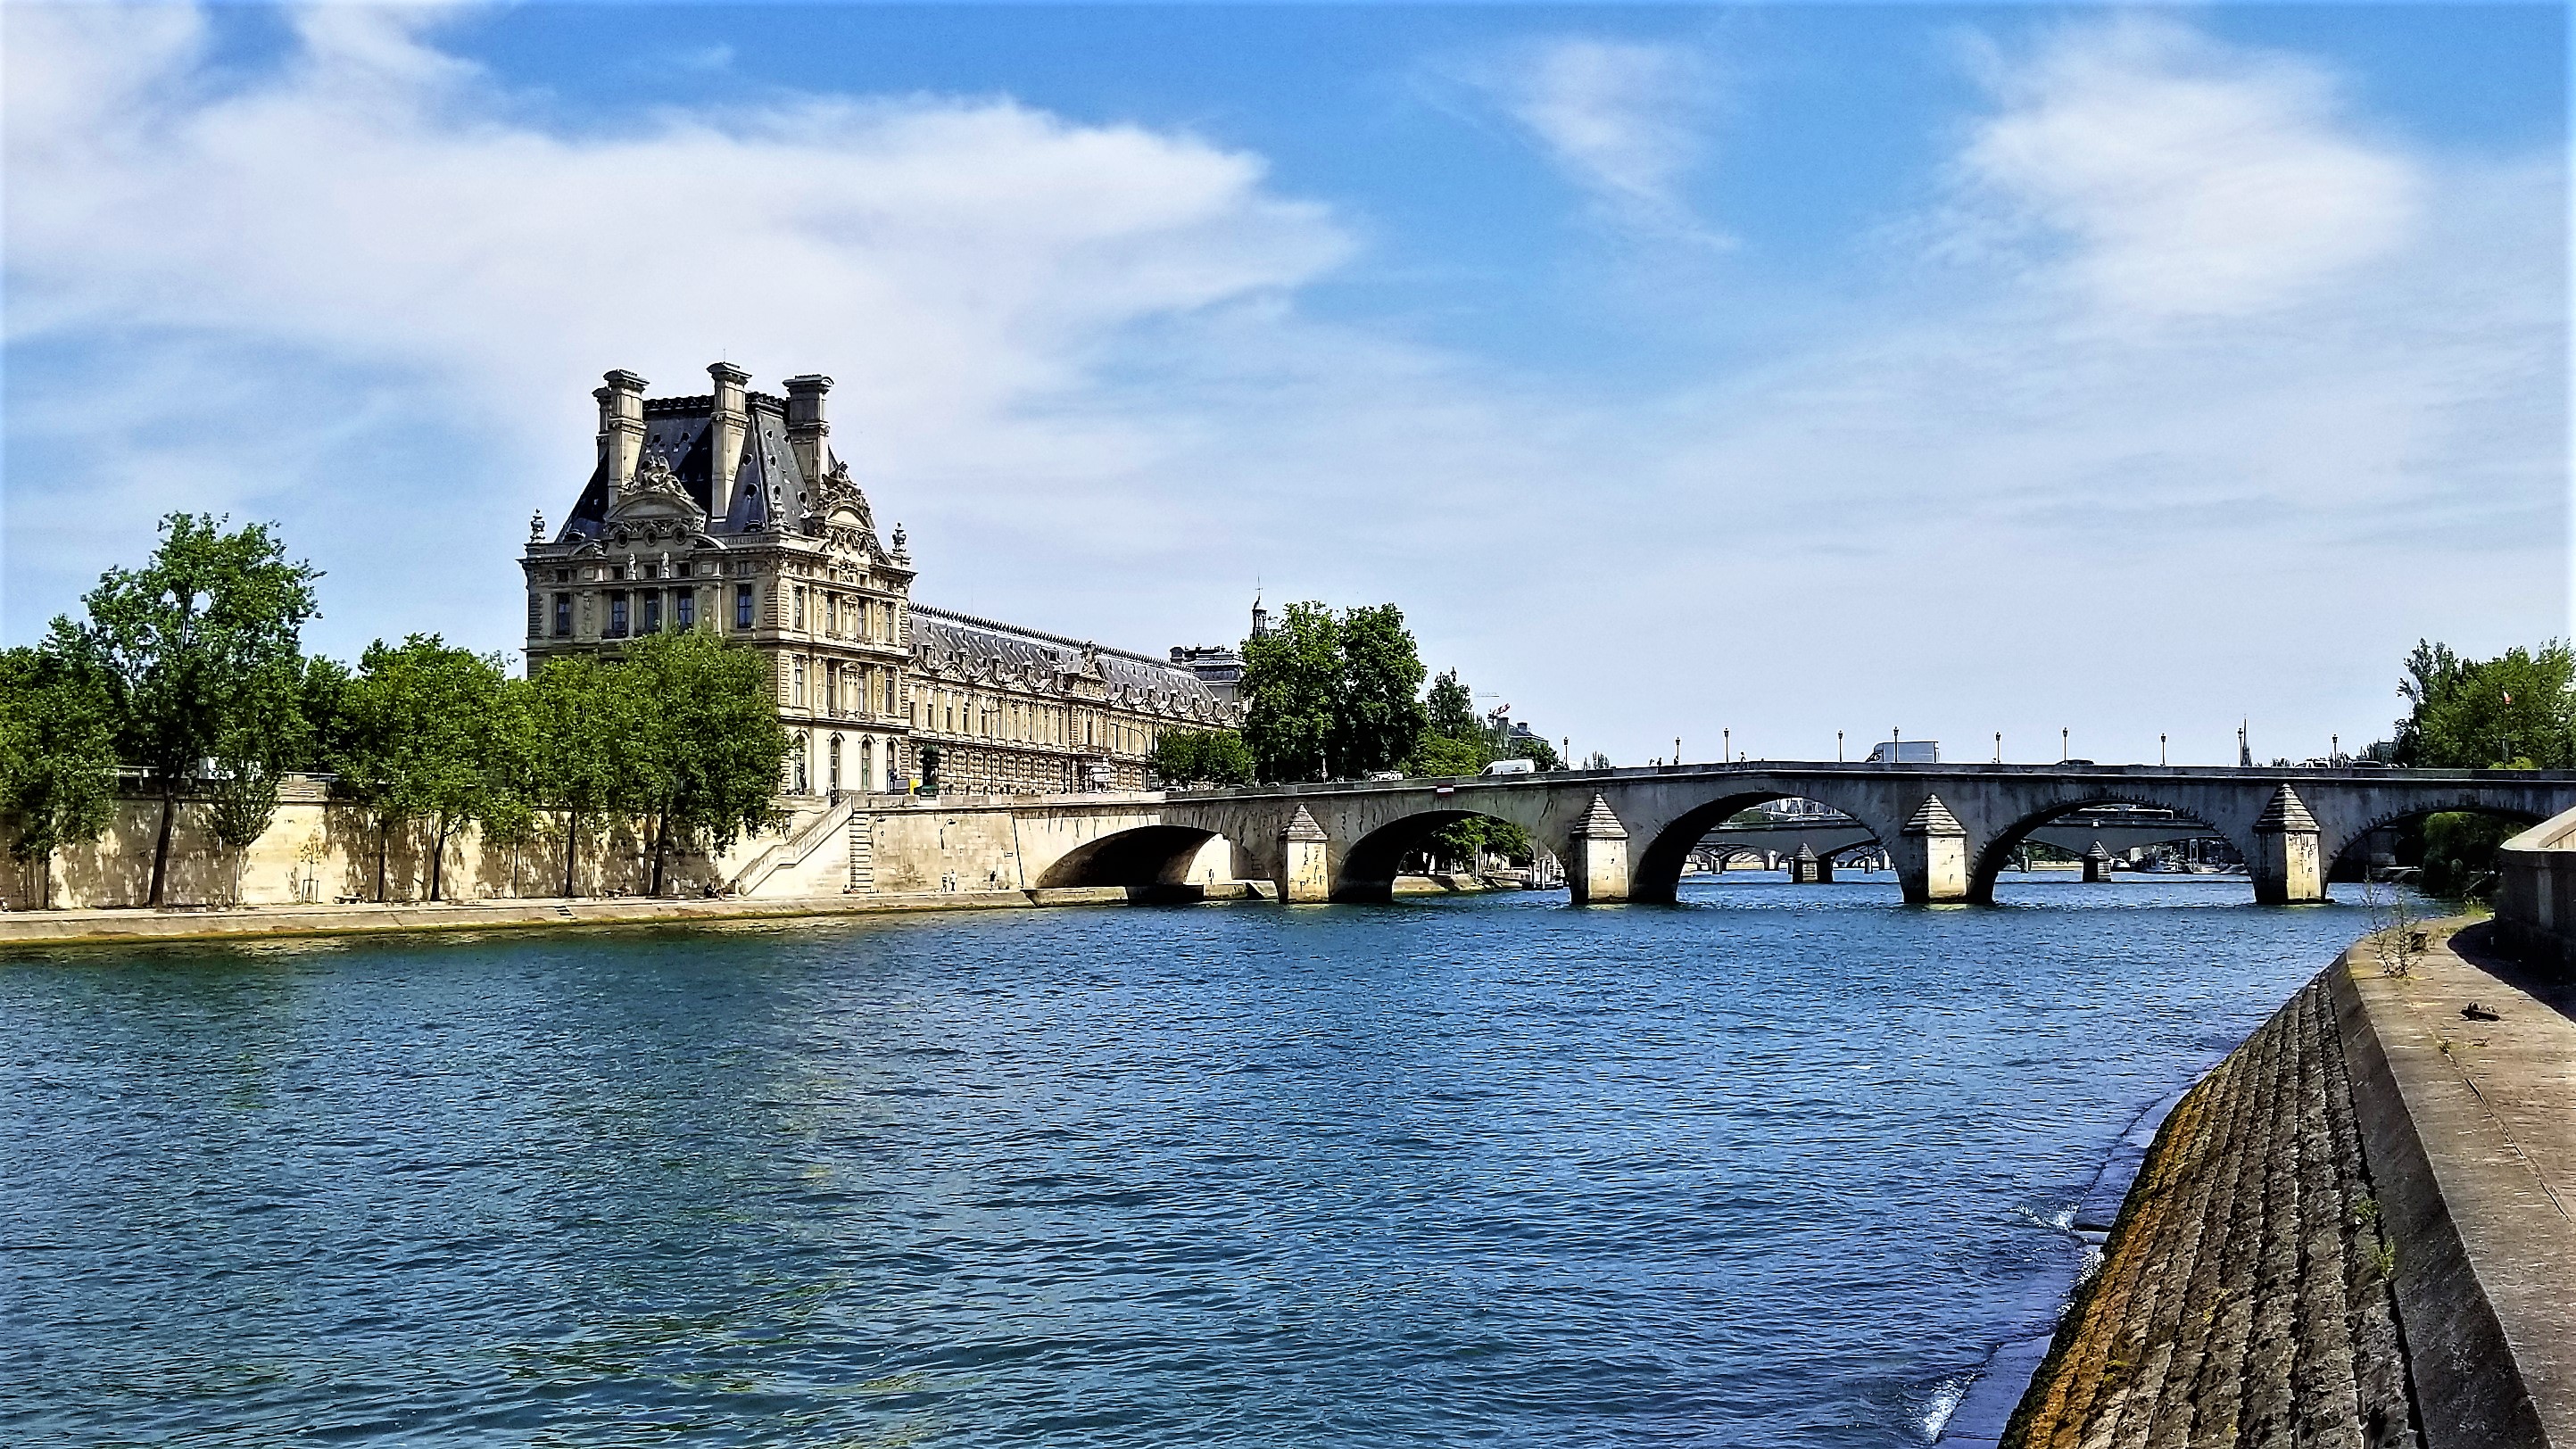 Quiet and serene on the River Seine